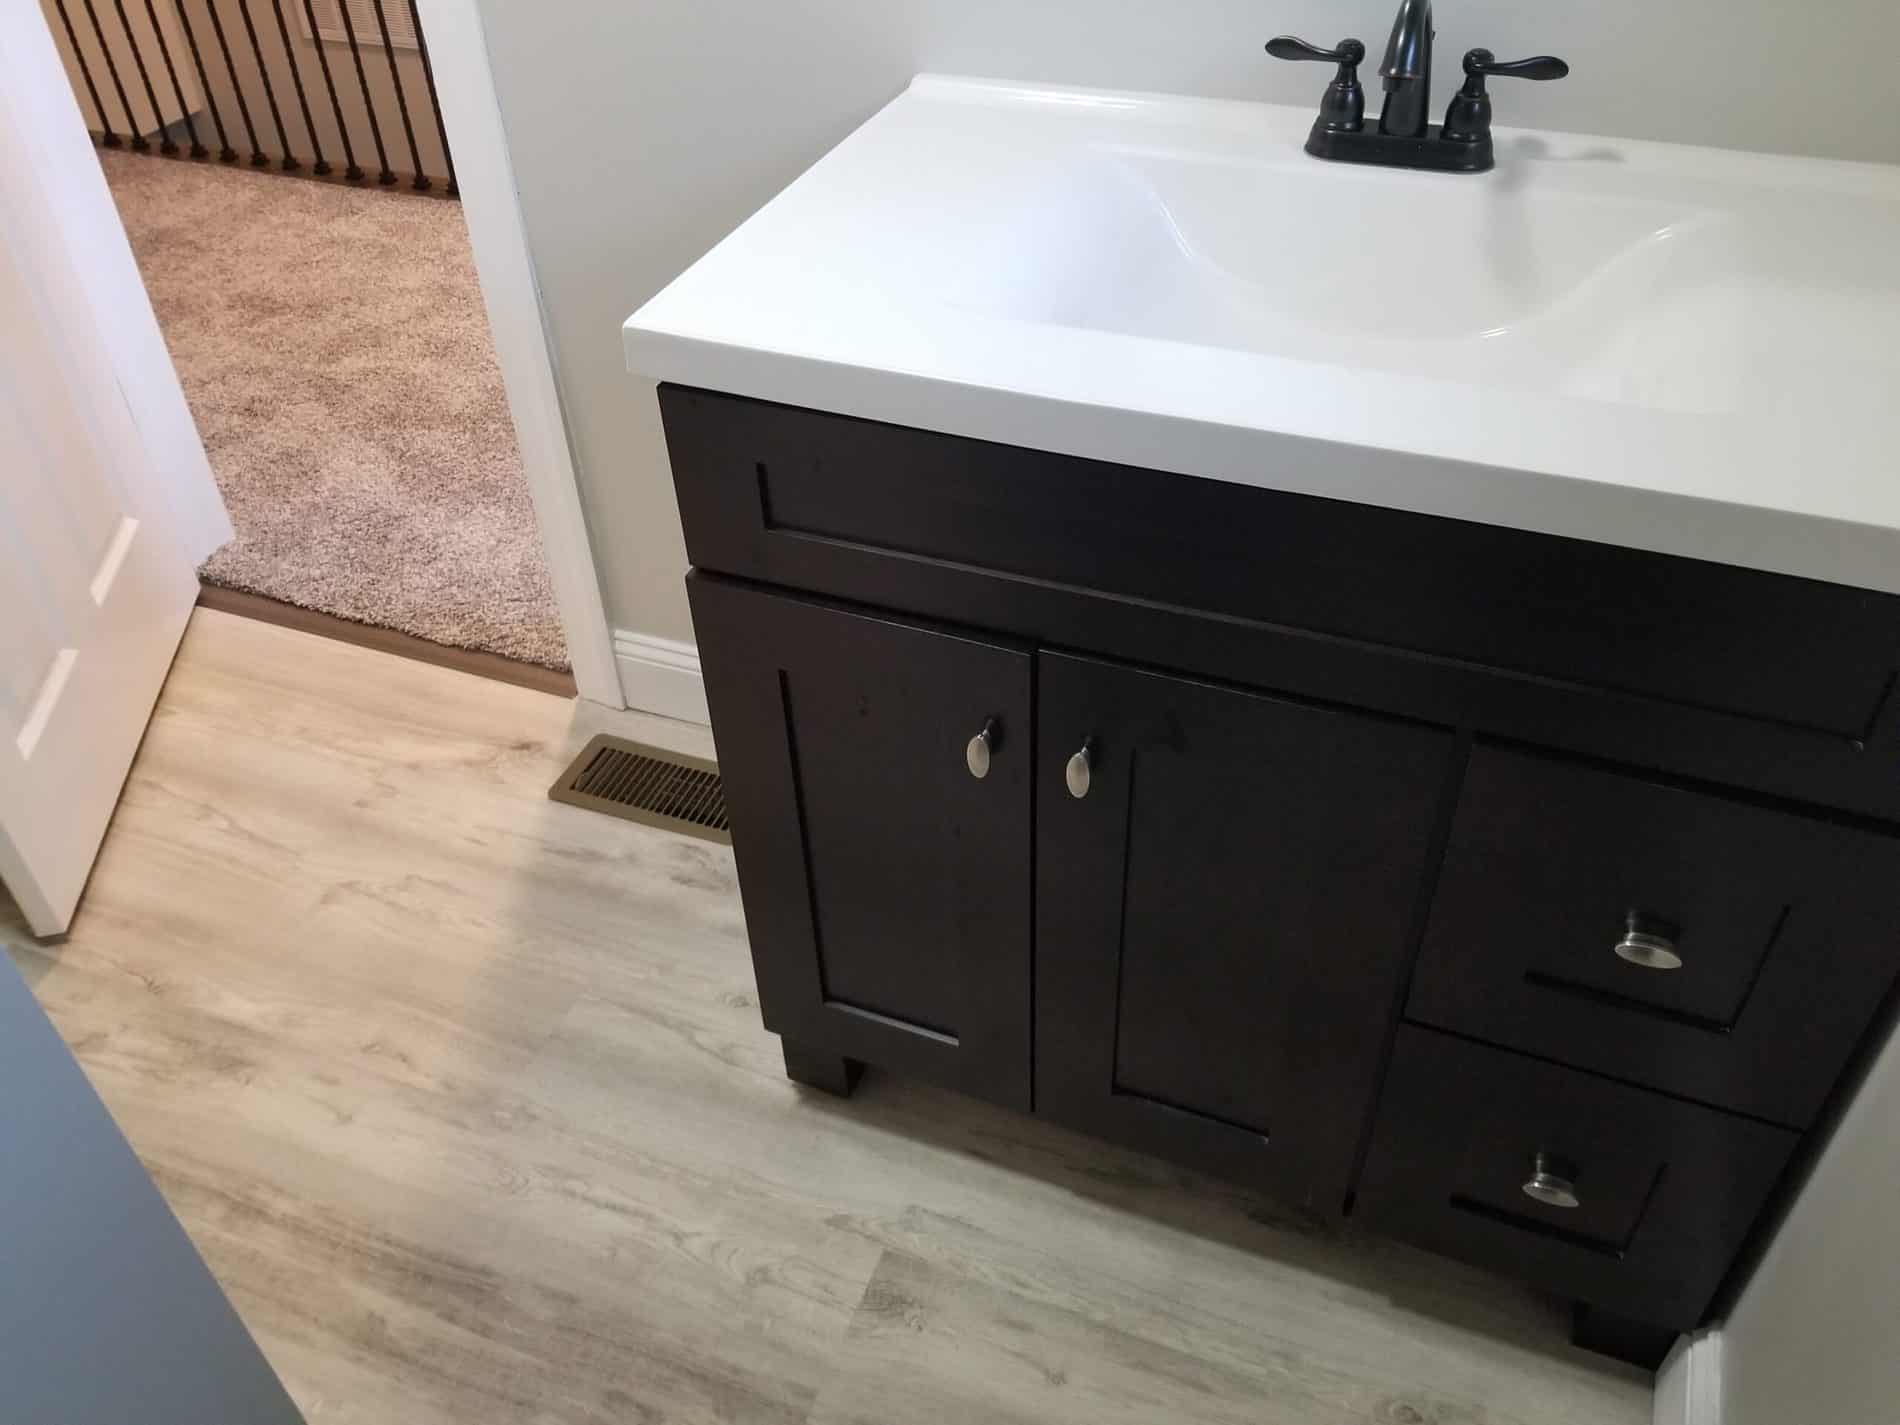 Home Remodel with bathroom on second floor with vanity